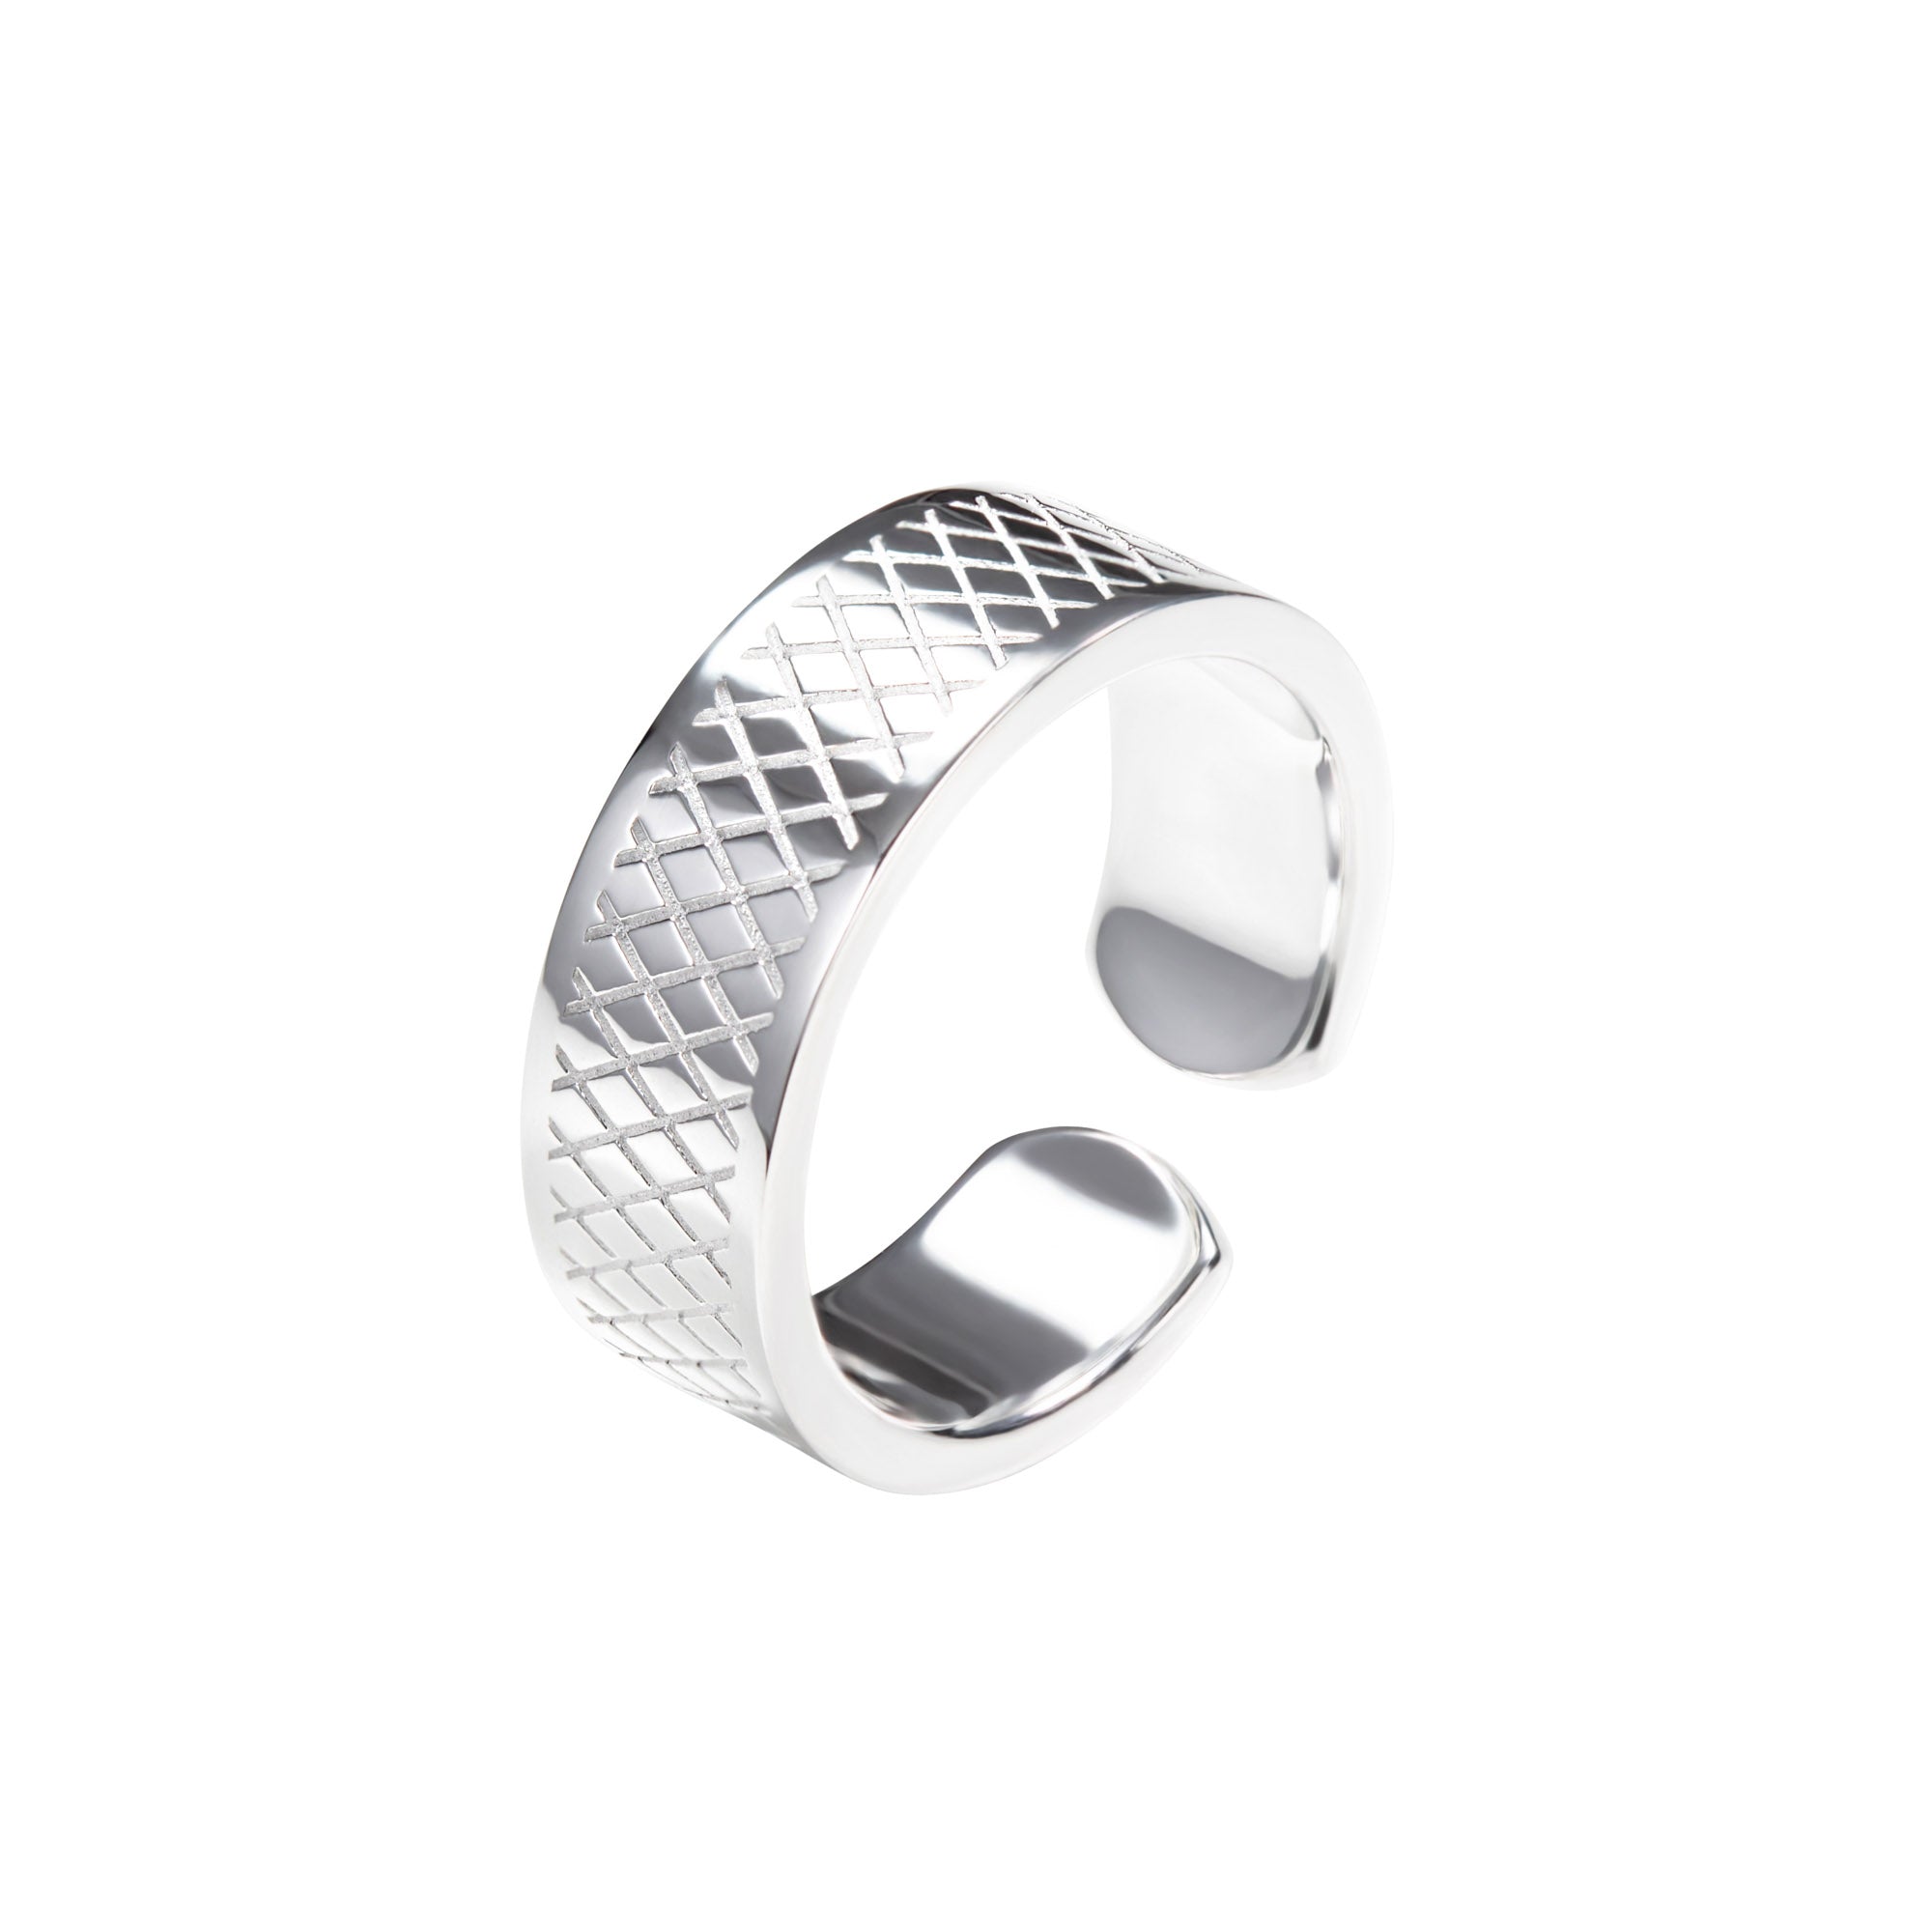 Traditioneller Ring - 925 Silber